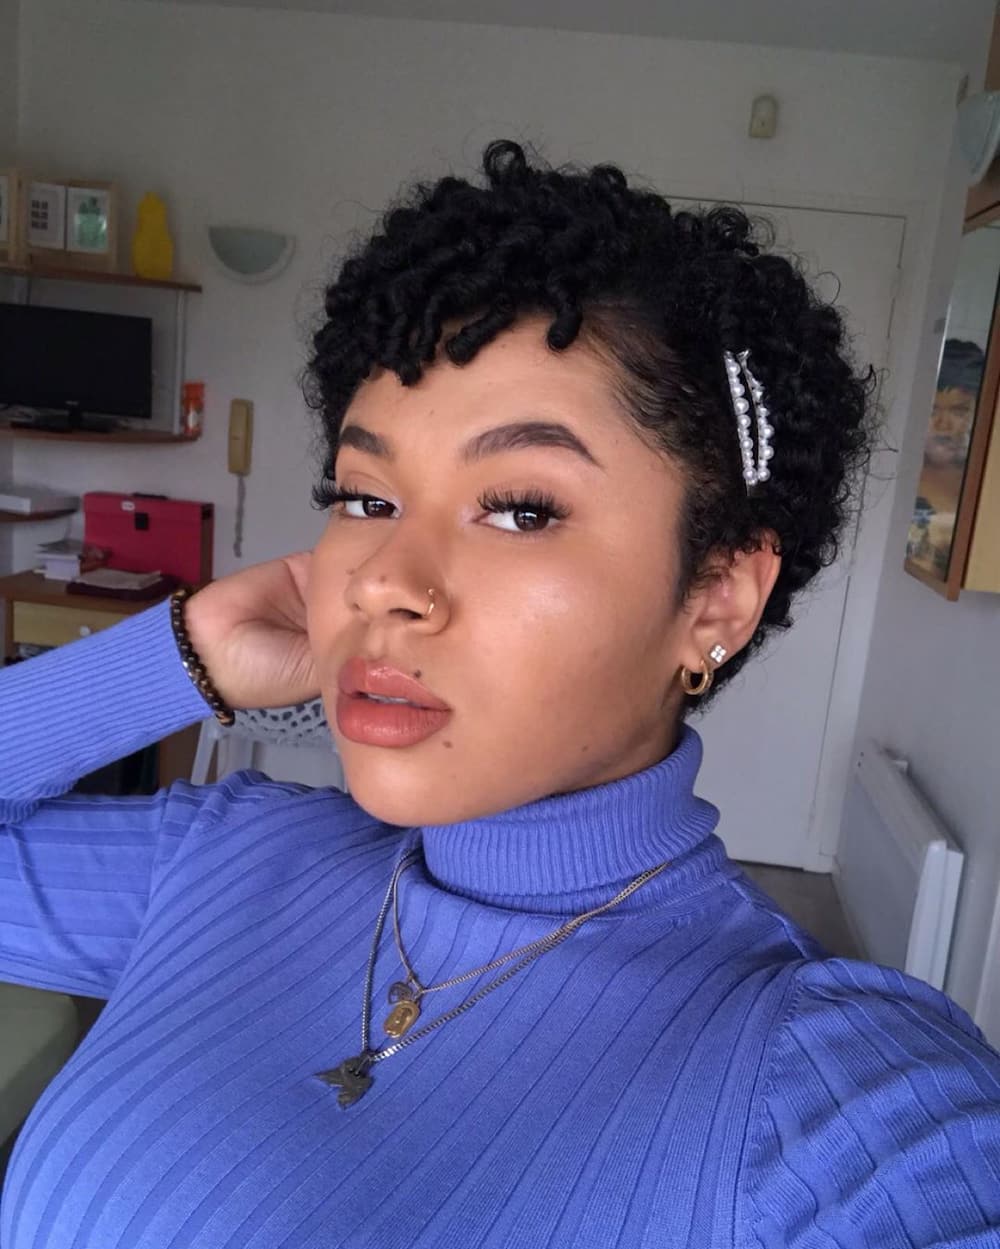 25 Cute short curly hairstyles for black women to try in 2020